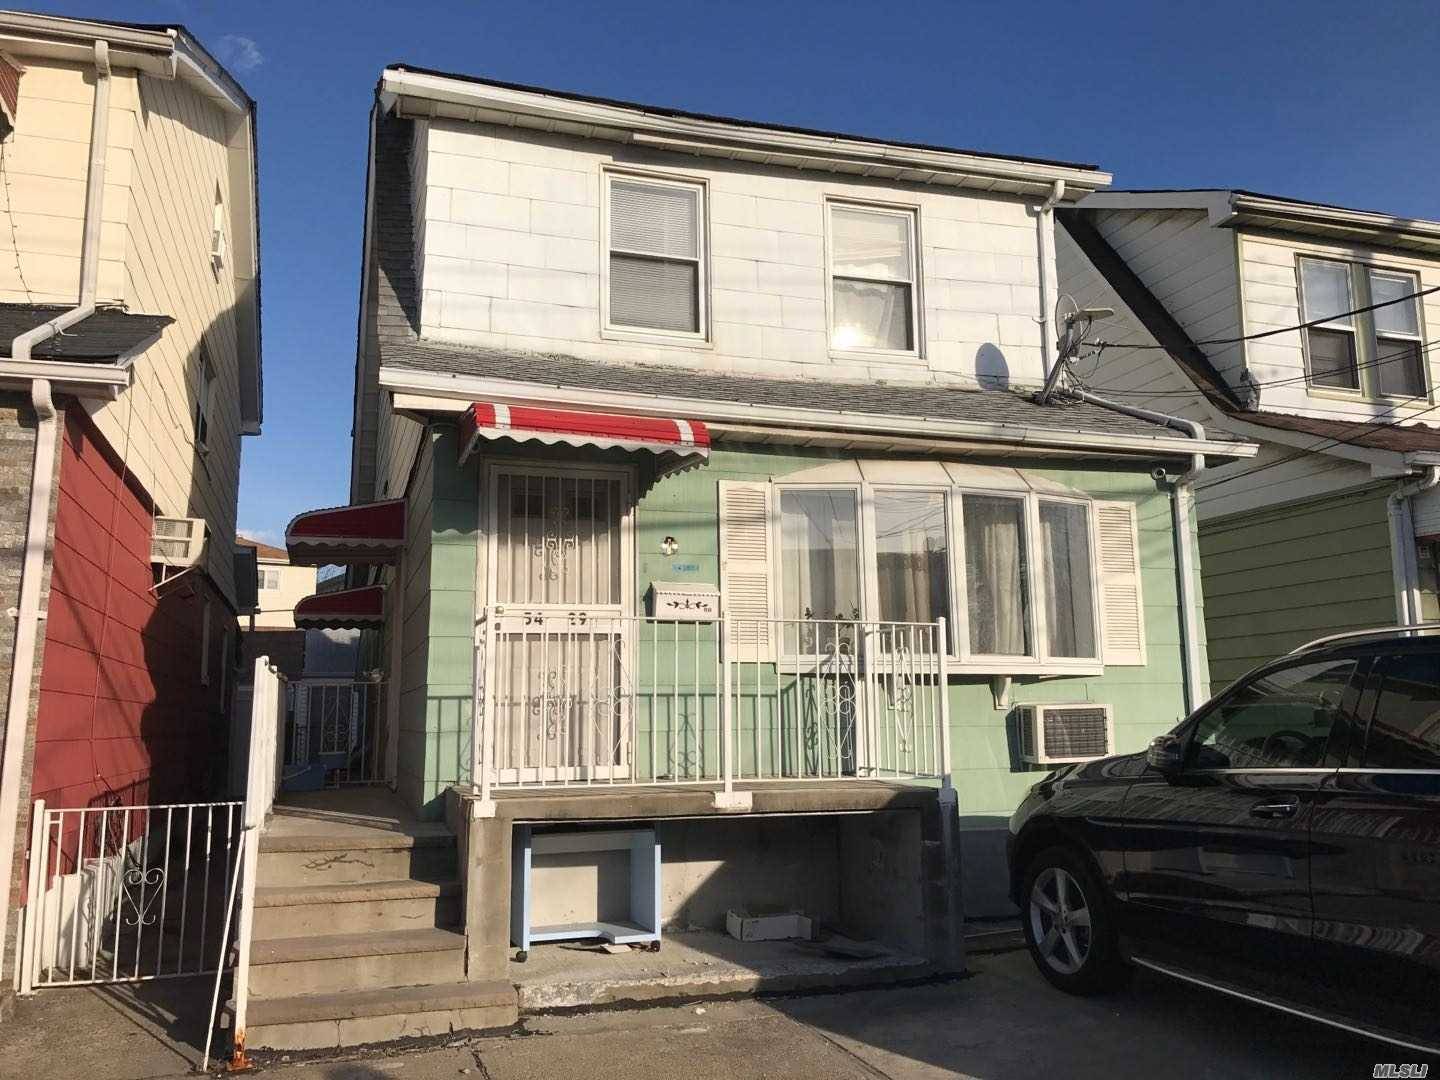 Great Legal 2 Family House For Rent, Great Location, Excellent Condition, Near Kissena Park, Main St.